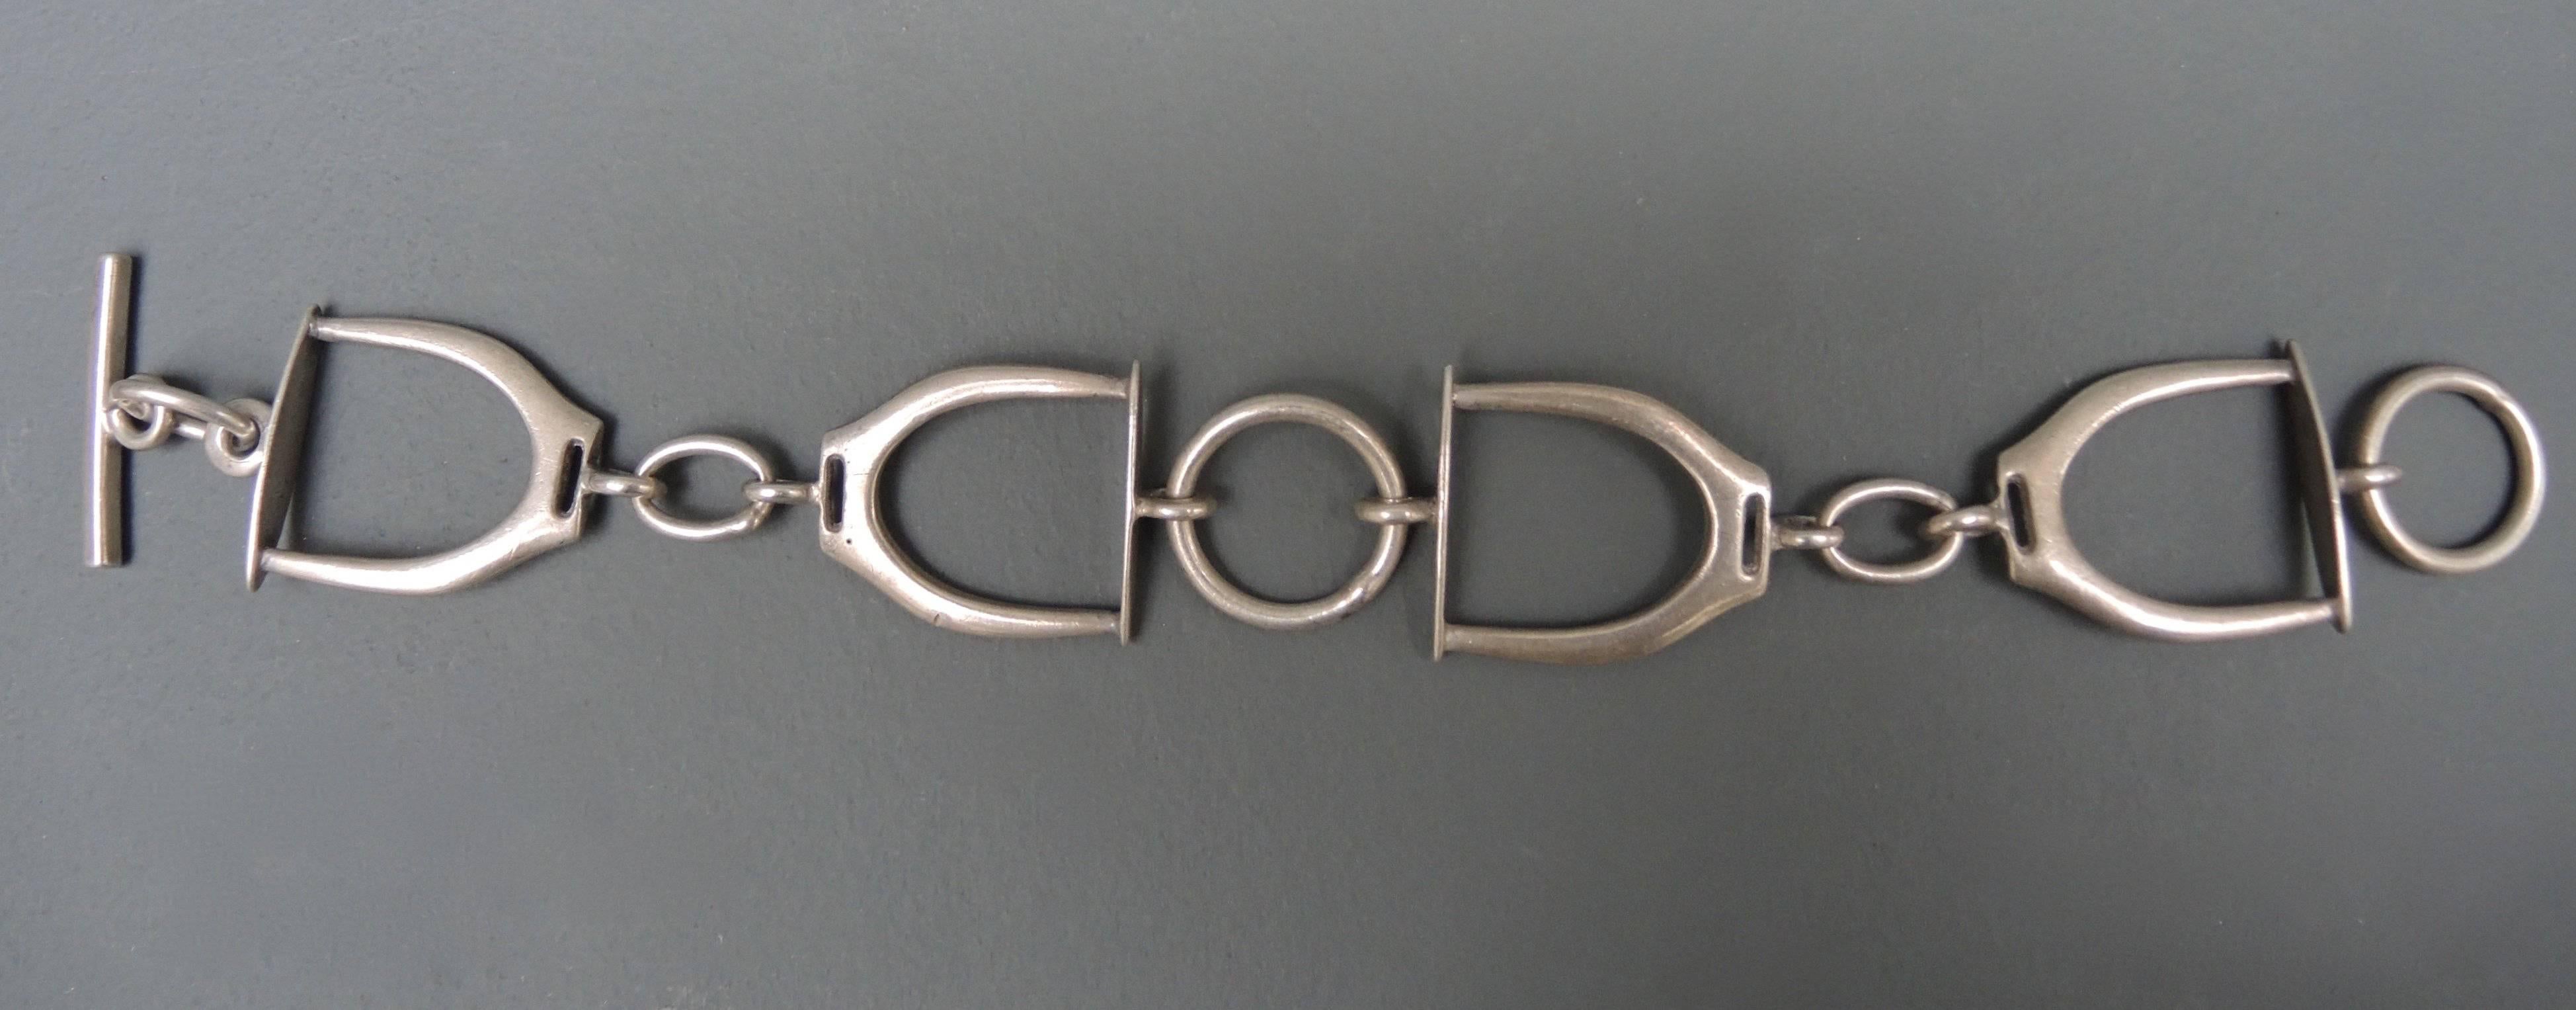 A unique vintage silver equestrian bracelet with saddle stirrups as links.This is 835 Belgian silver circa 1940, a mark used uniquely for belgian silver items pre 1950.
22 cm long from end to end. Fits a normal woman's wrist.